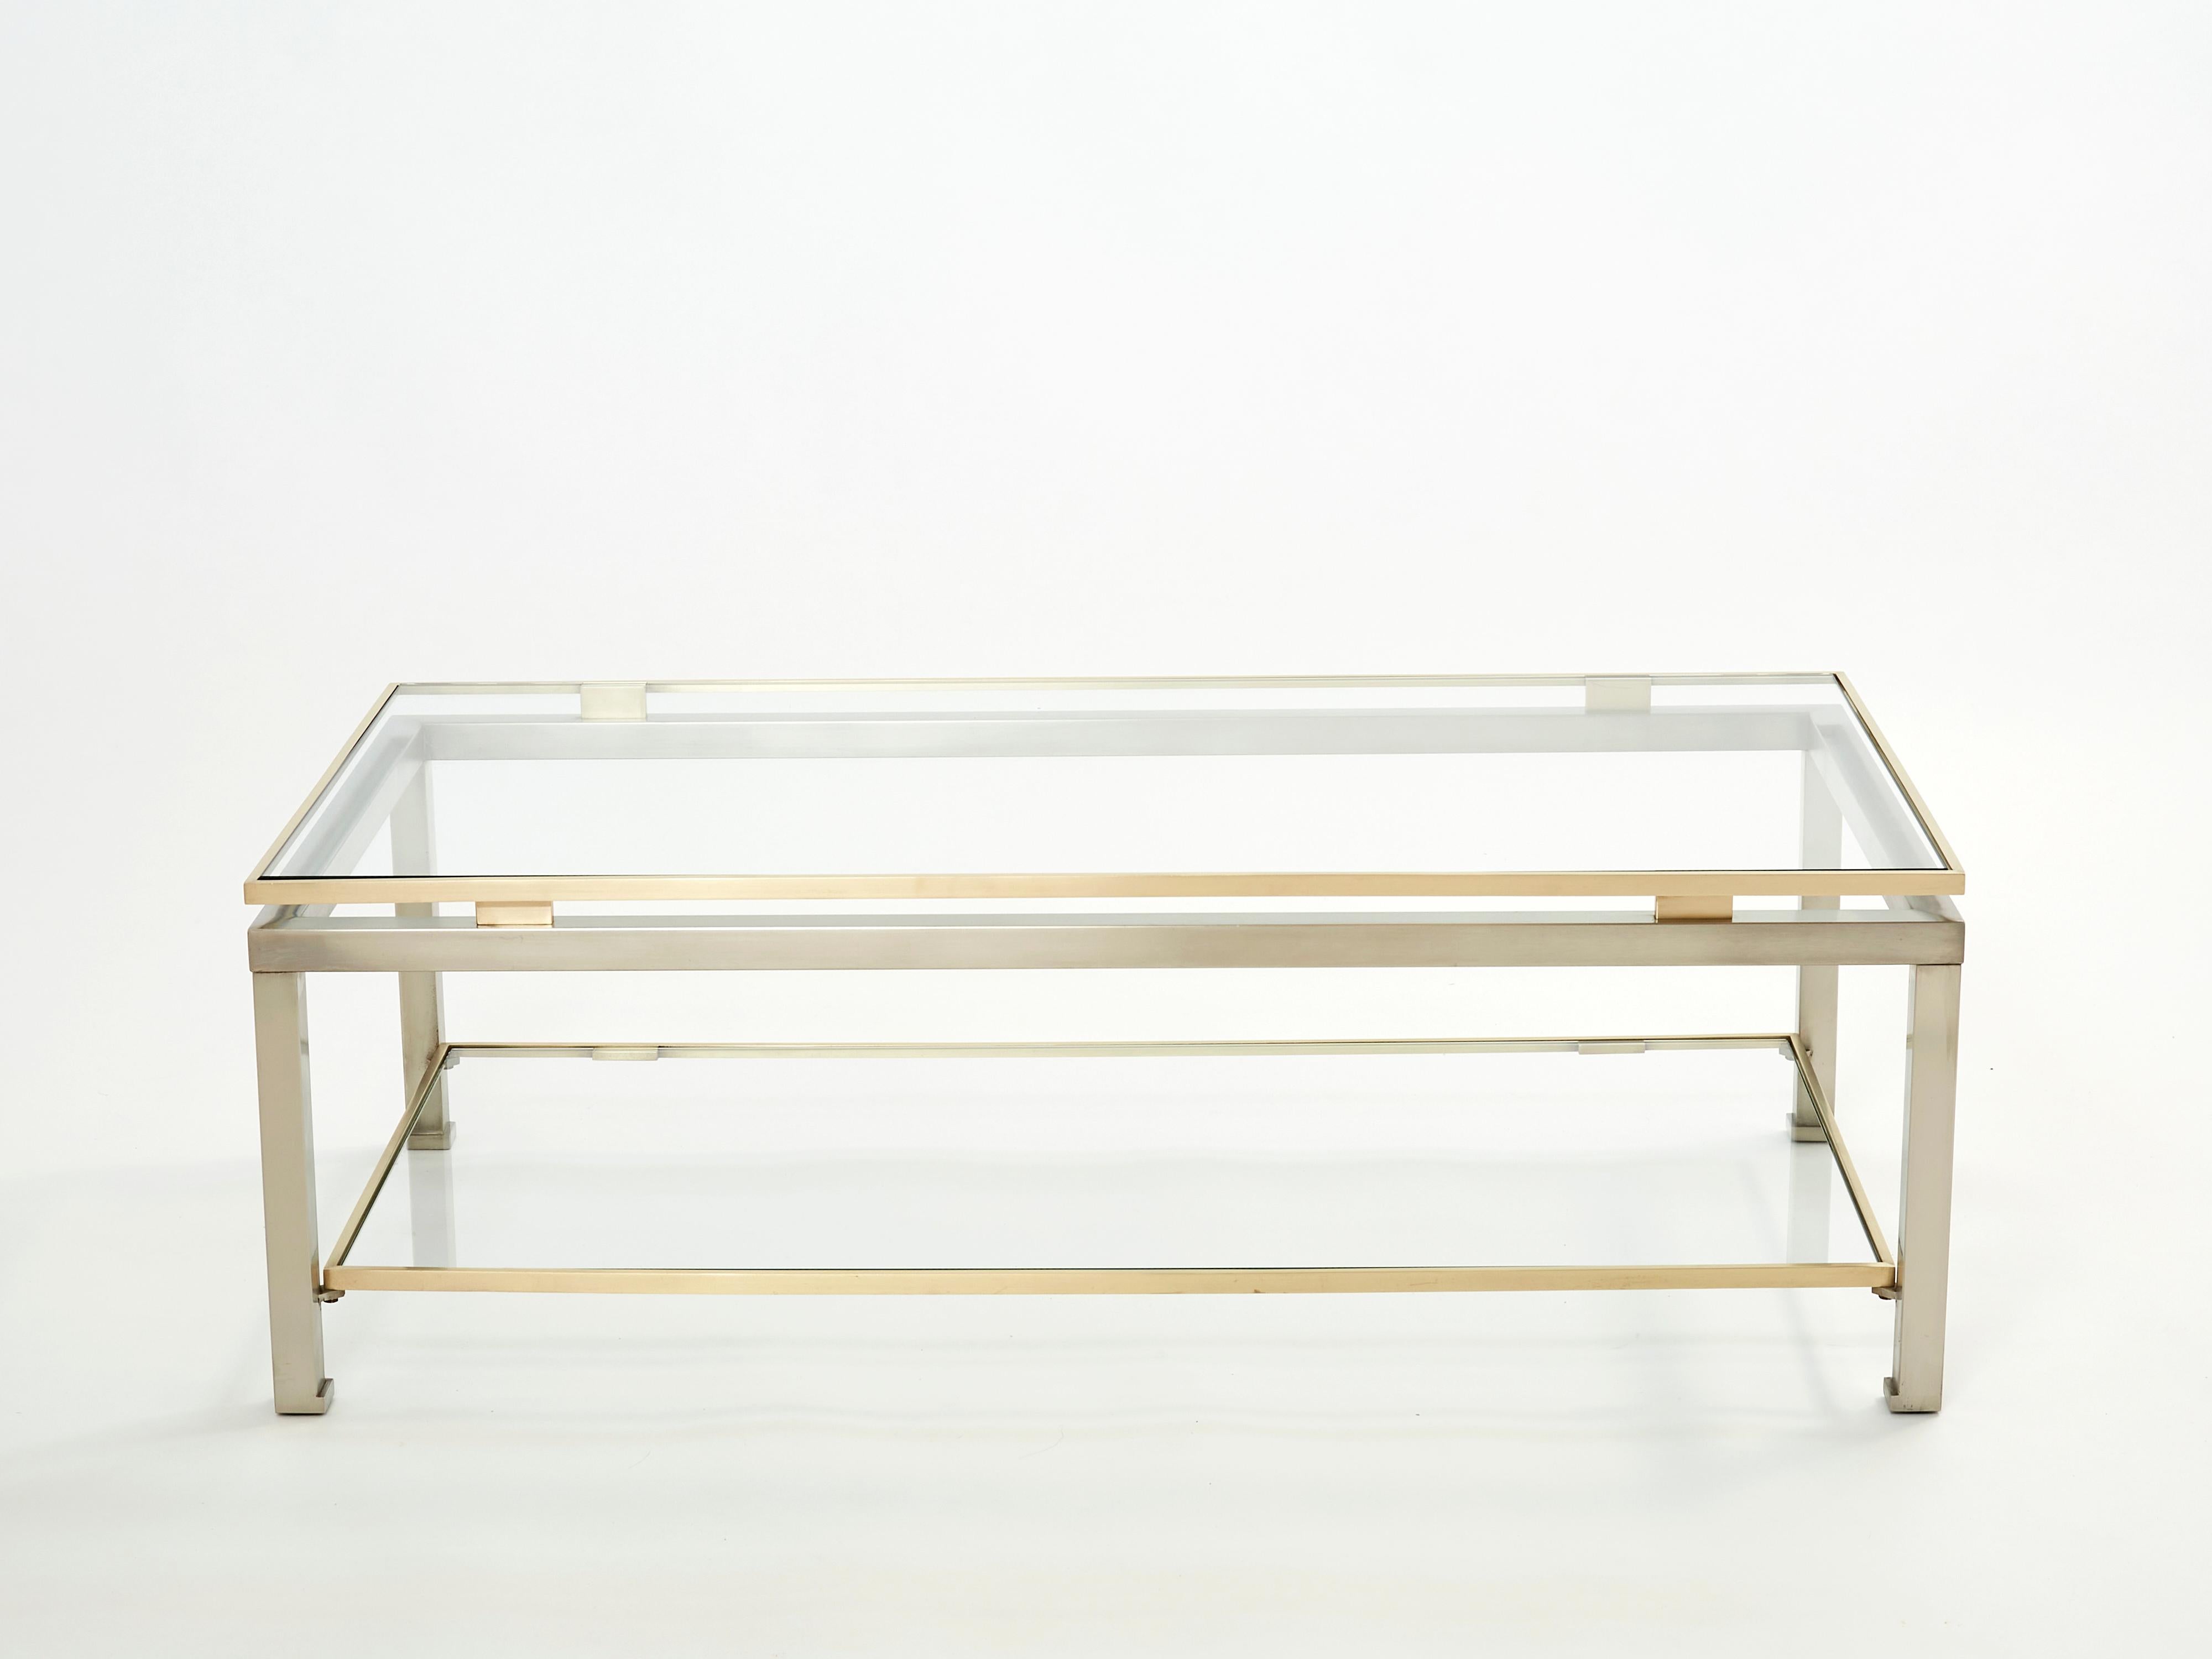 Simple lines point to this two-tier coffee table's French mid-century roots. Designed by Guy Lefevre for Maison Jansen, it features smooth steel legs with a brass top and accents, and transparent glass tops. Its symmetry, elevated glass, and strong